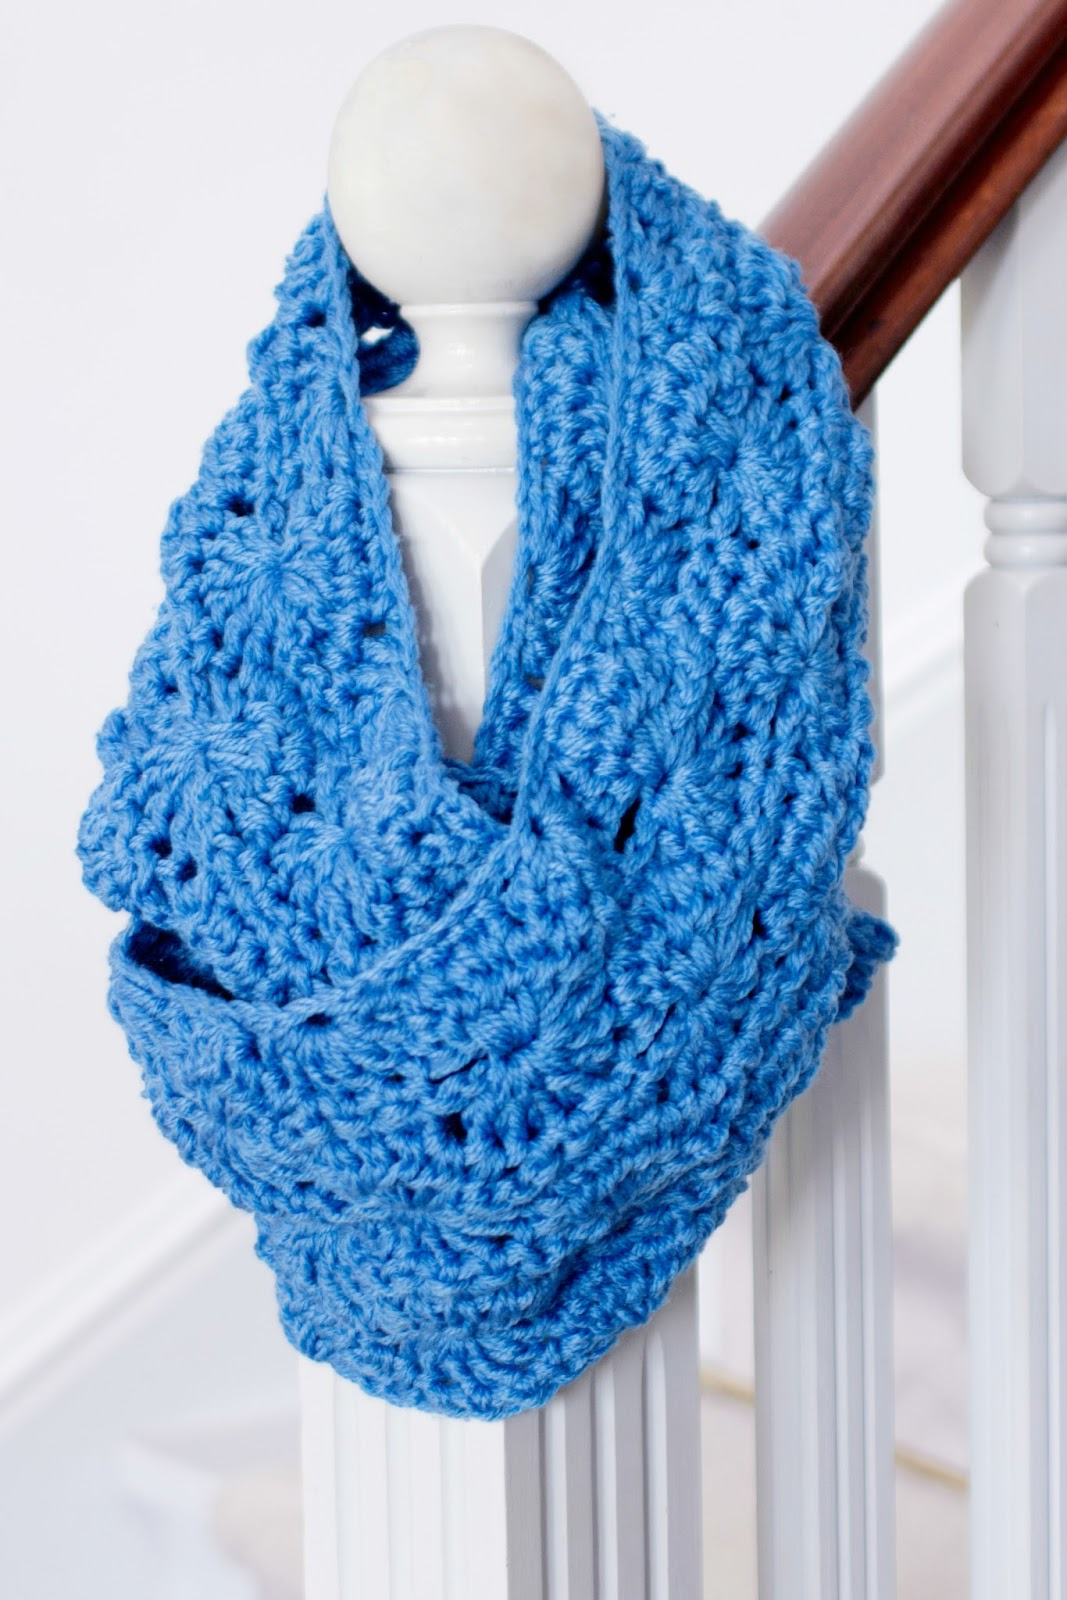 Chunky Scarf Crochet Pattern Beneficial Scarf Crochet Patterns Crochet And Knitting Patterns 2019